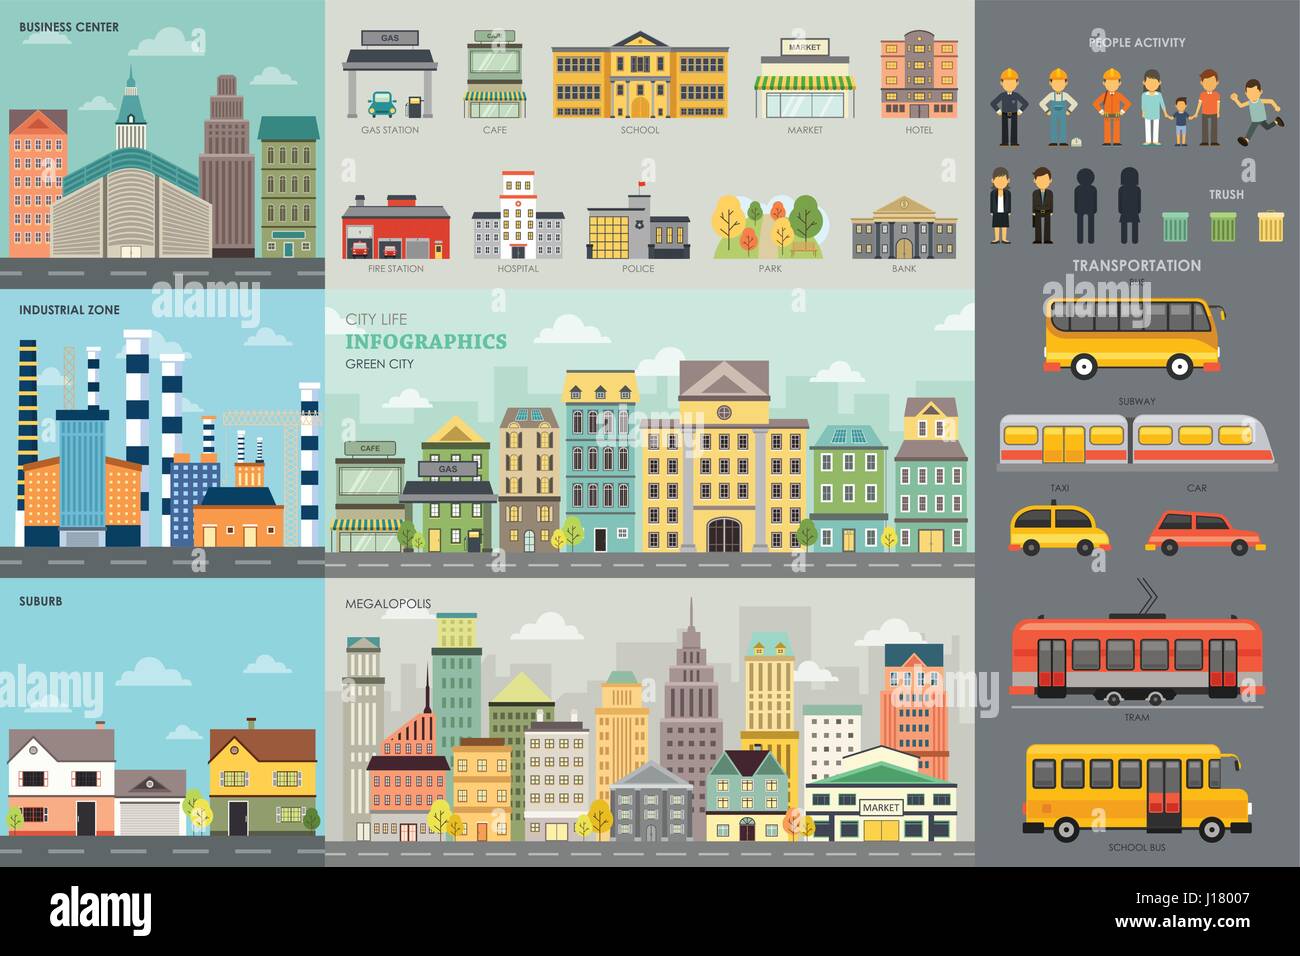 A vector illustration of City Life and Transportation Infographic Elements Stock Vector